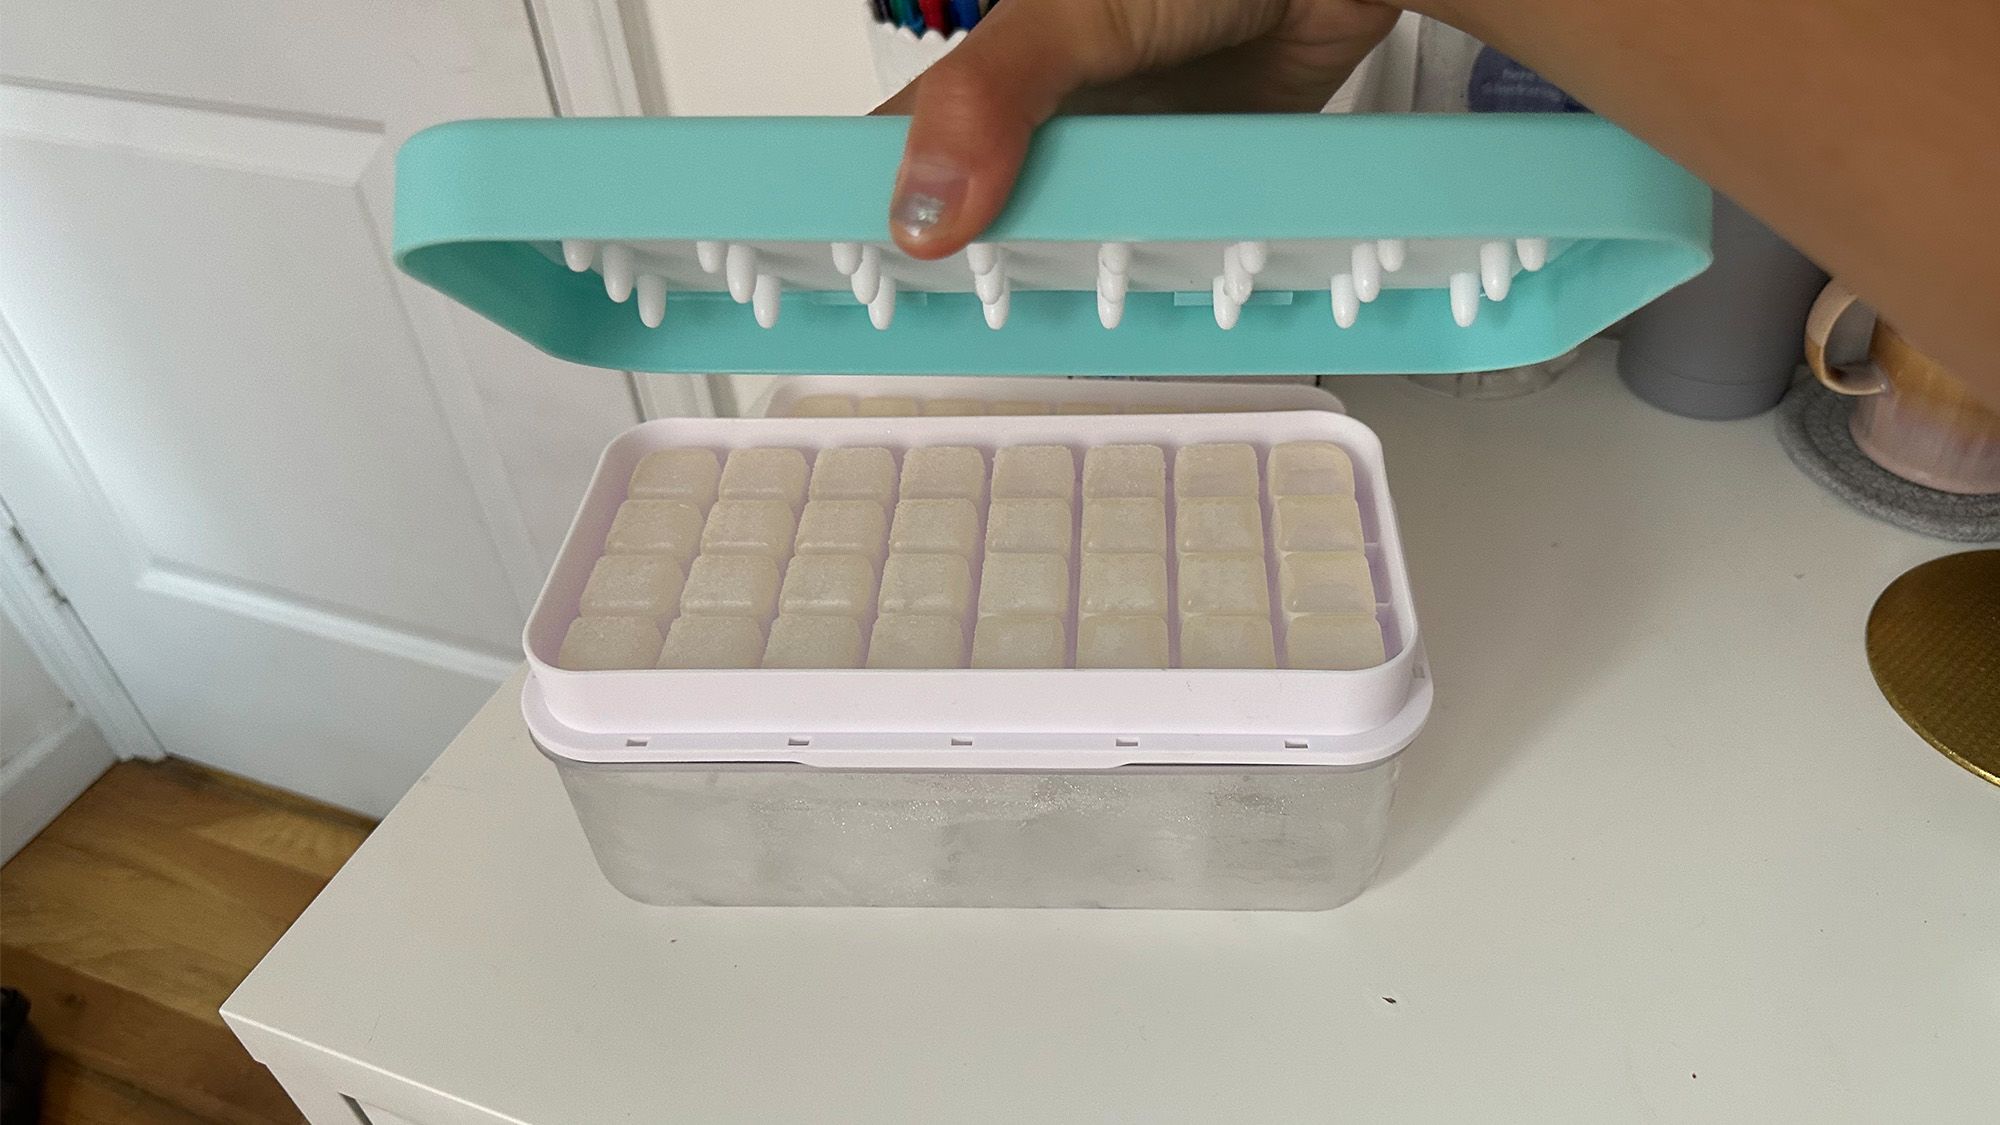 Phinox Ice Cube Tray: An under $25 kitchen score